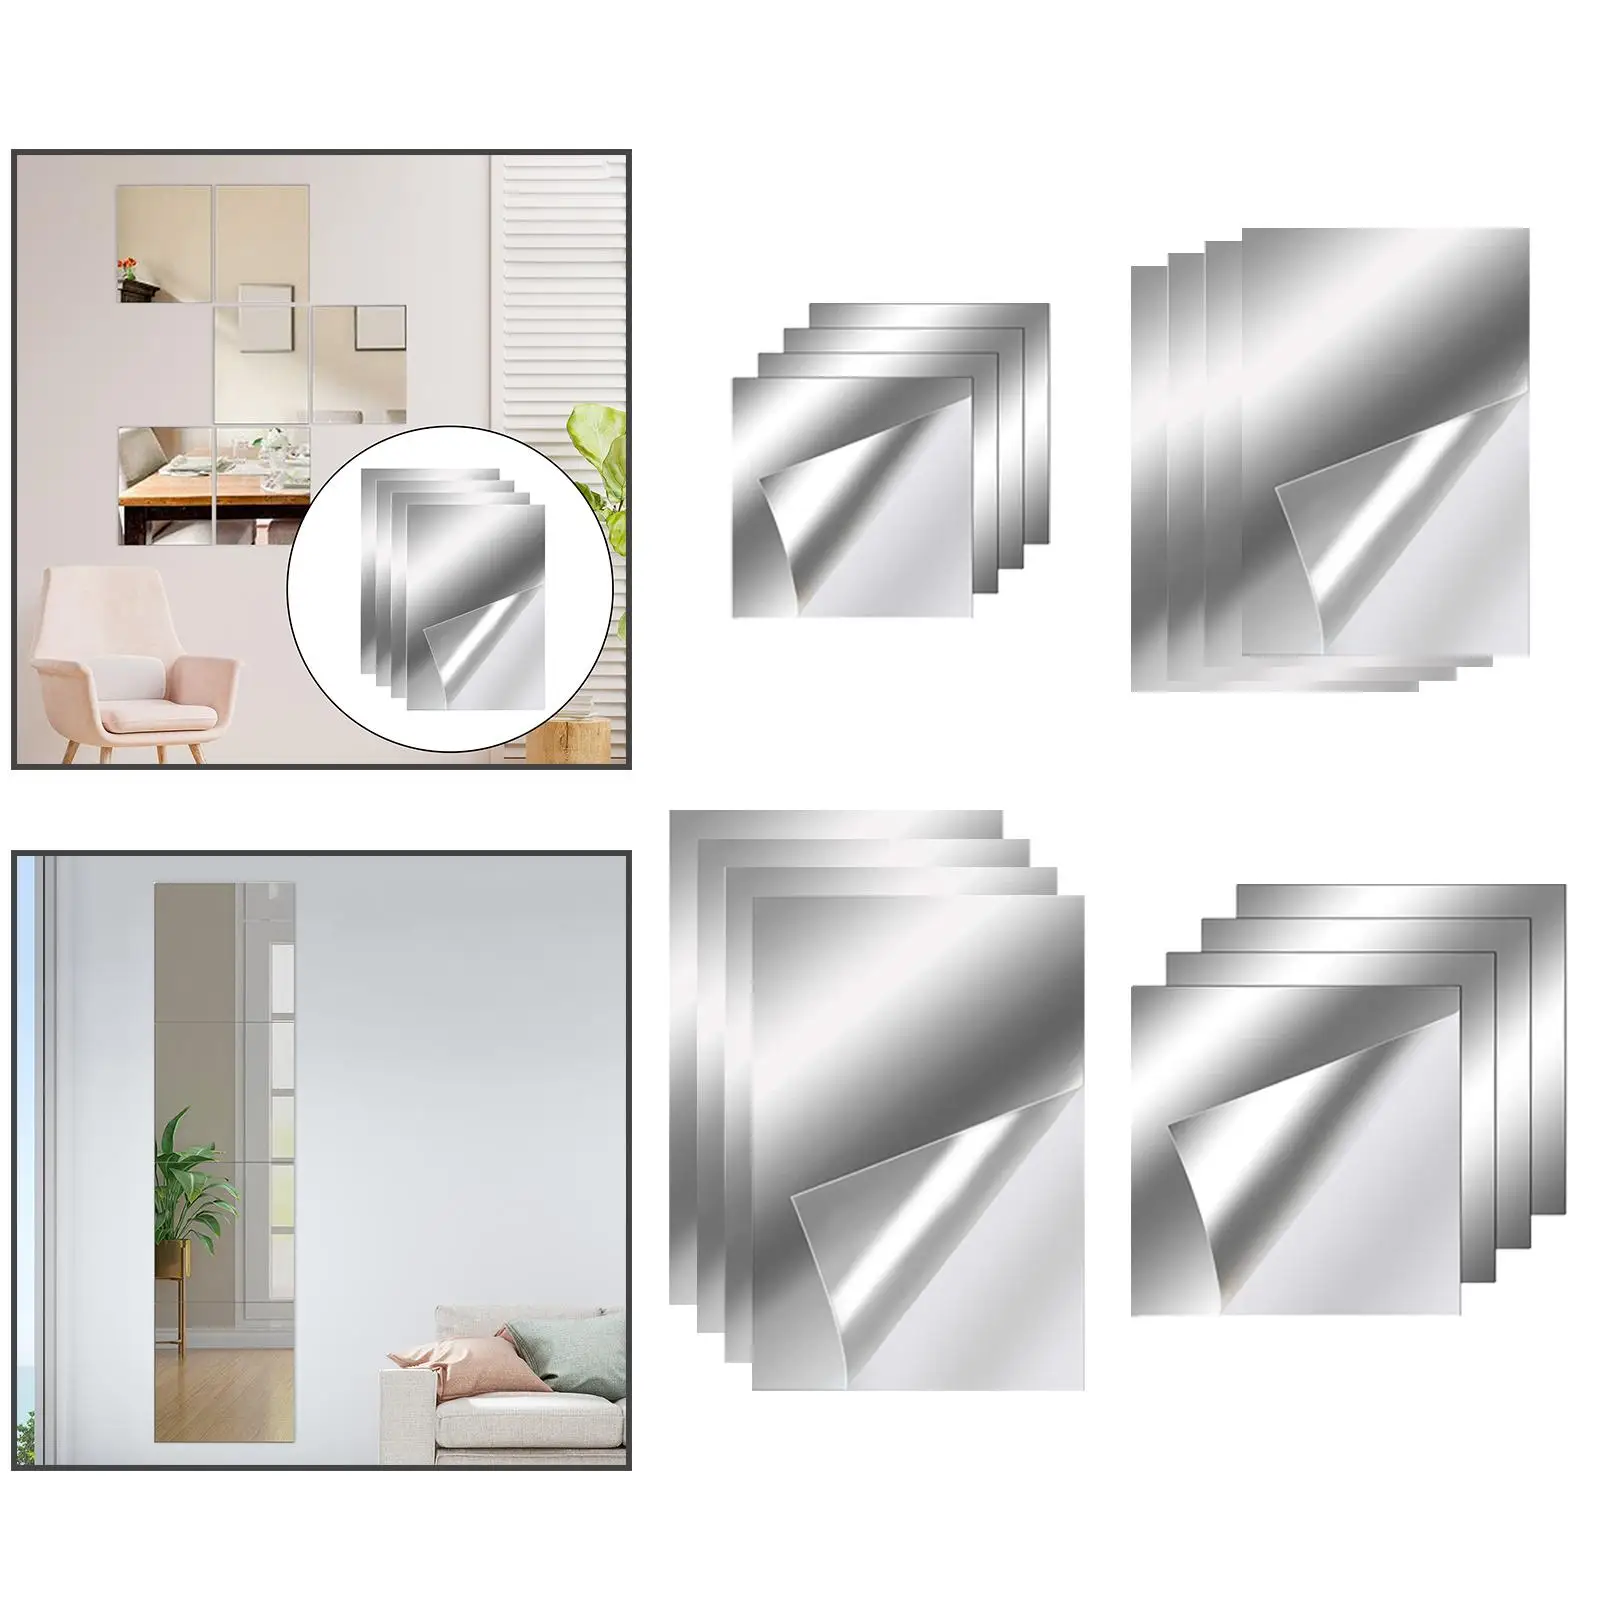 4X Flexible Mirror Wall Stickers, Acrylic Mirror Sheets Non Glass Full Body Mirror Mirror Tiles for Bedroom Living Room Sofa Gym Background, 15cmx25cm